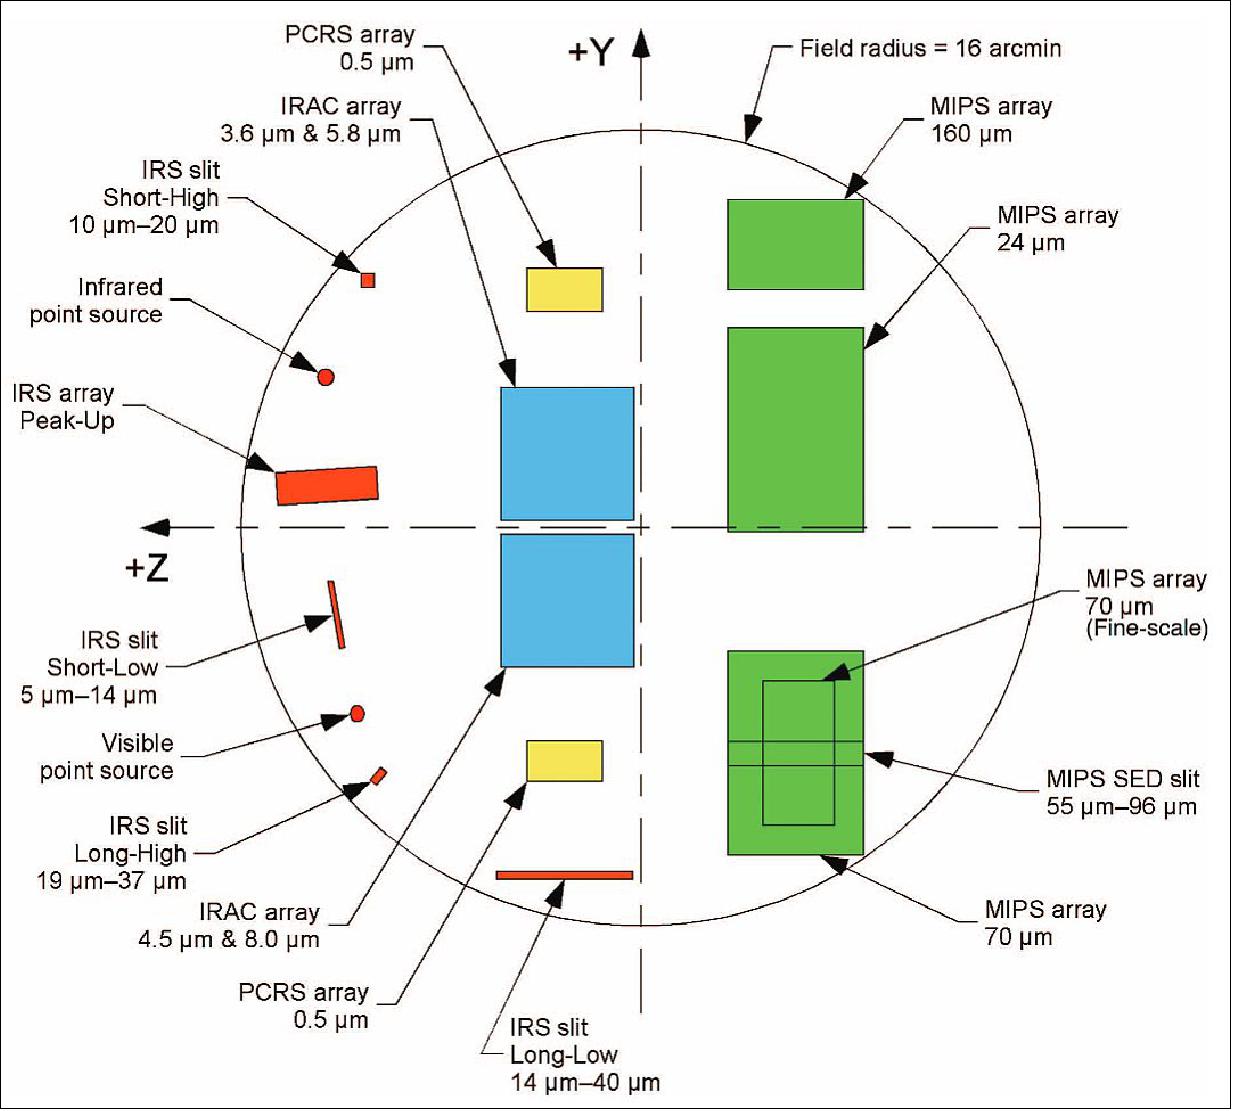 Figure 3: Spitzer focal plane layout as seen looking down from the telescope aperture. In this coordinate system the +Z direction points toward the sun. In addition to the science instrument apertures, the figure shows the location of the two pointing calibration reference sensor (PCRS) arrays and the two point sources that were used for ground-based focus checks and focal plane mapping. The MIPS apertures appear rectangular because the scan mirror accesses an area larger than the instantaneous footprint of the array; the position of the SED slit and the fine-scale array are shown schematically (image credit: Spitzer Team)